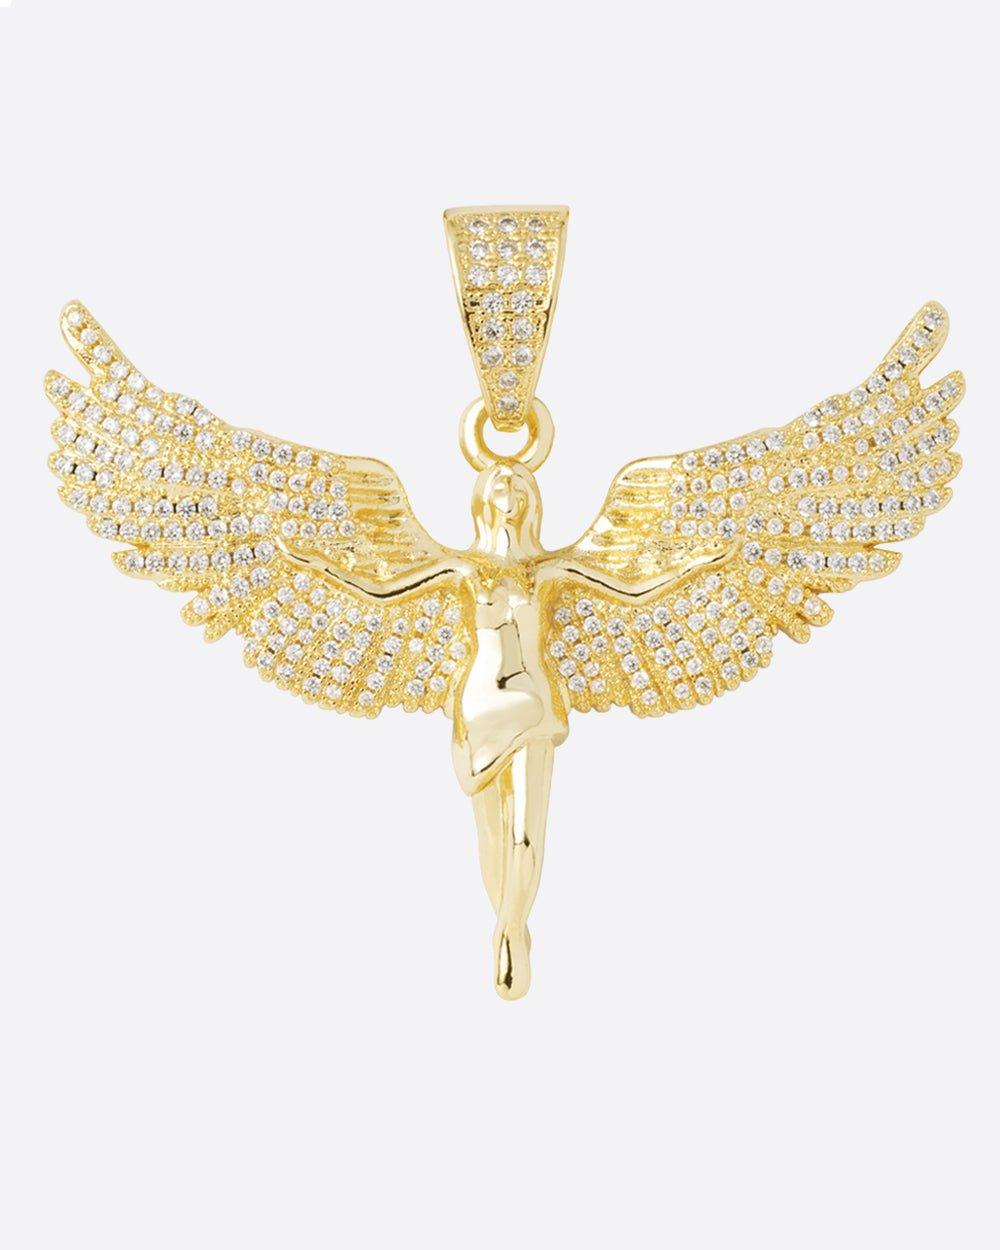 ICED ANGEL WINGS PENDANT. - 18K GOLD - DRIP IN THE JEWEL